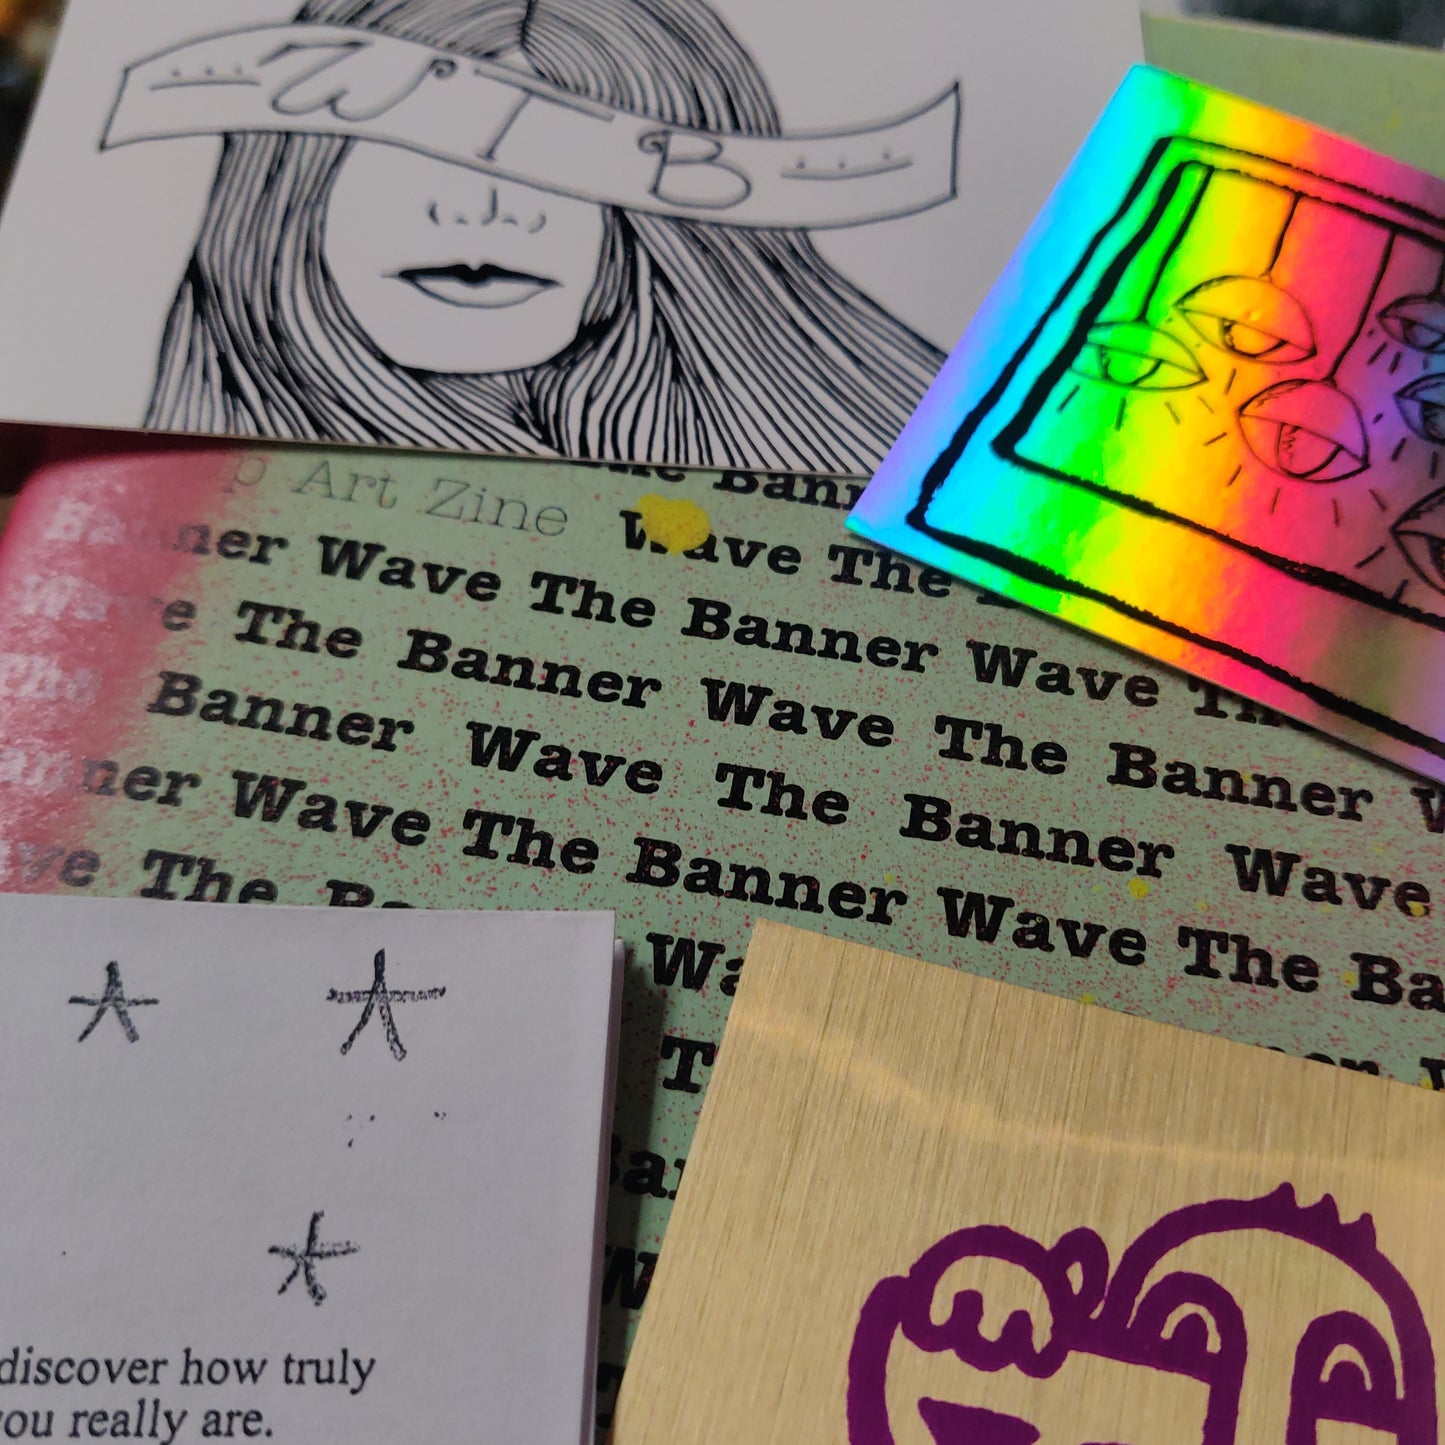 Wave the Banner Group Art ZiNE (001 + 002) + Stickers